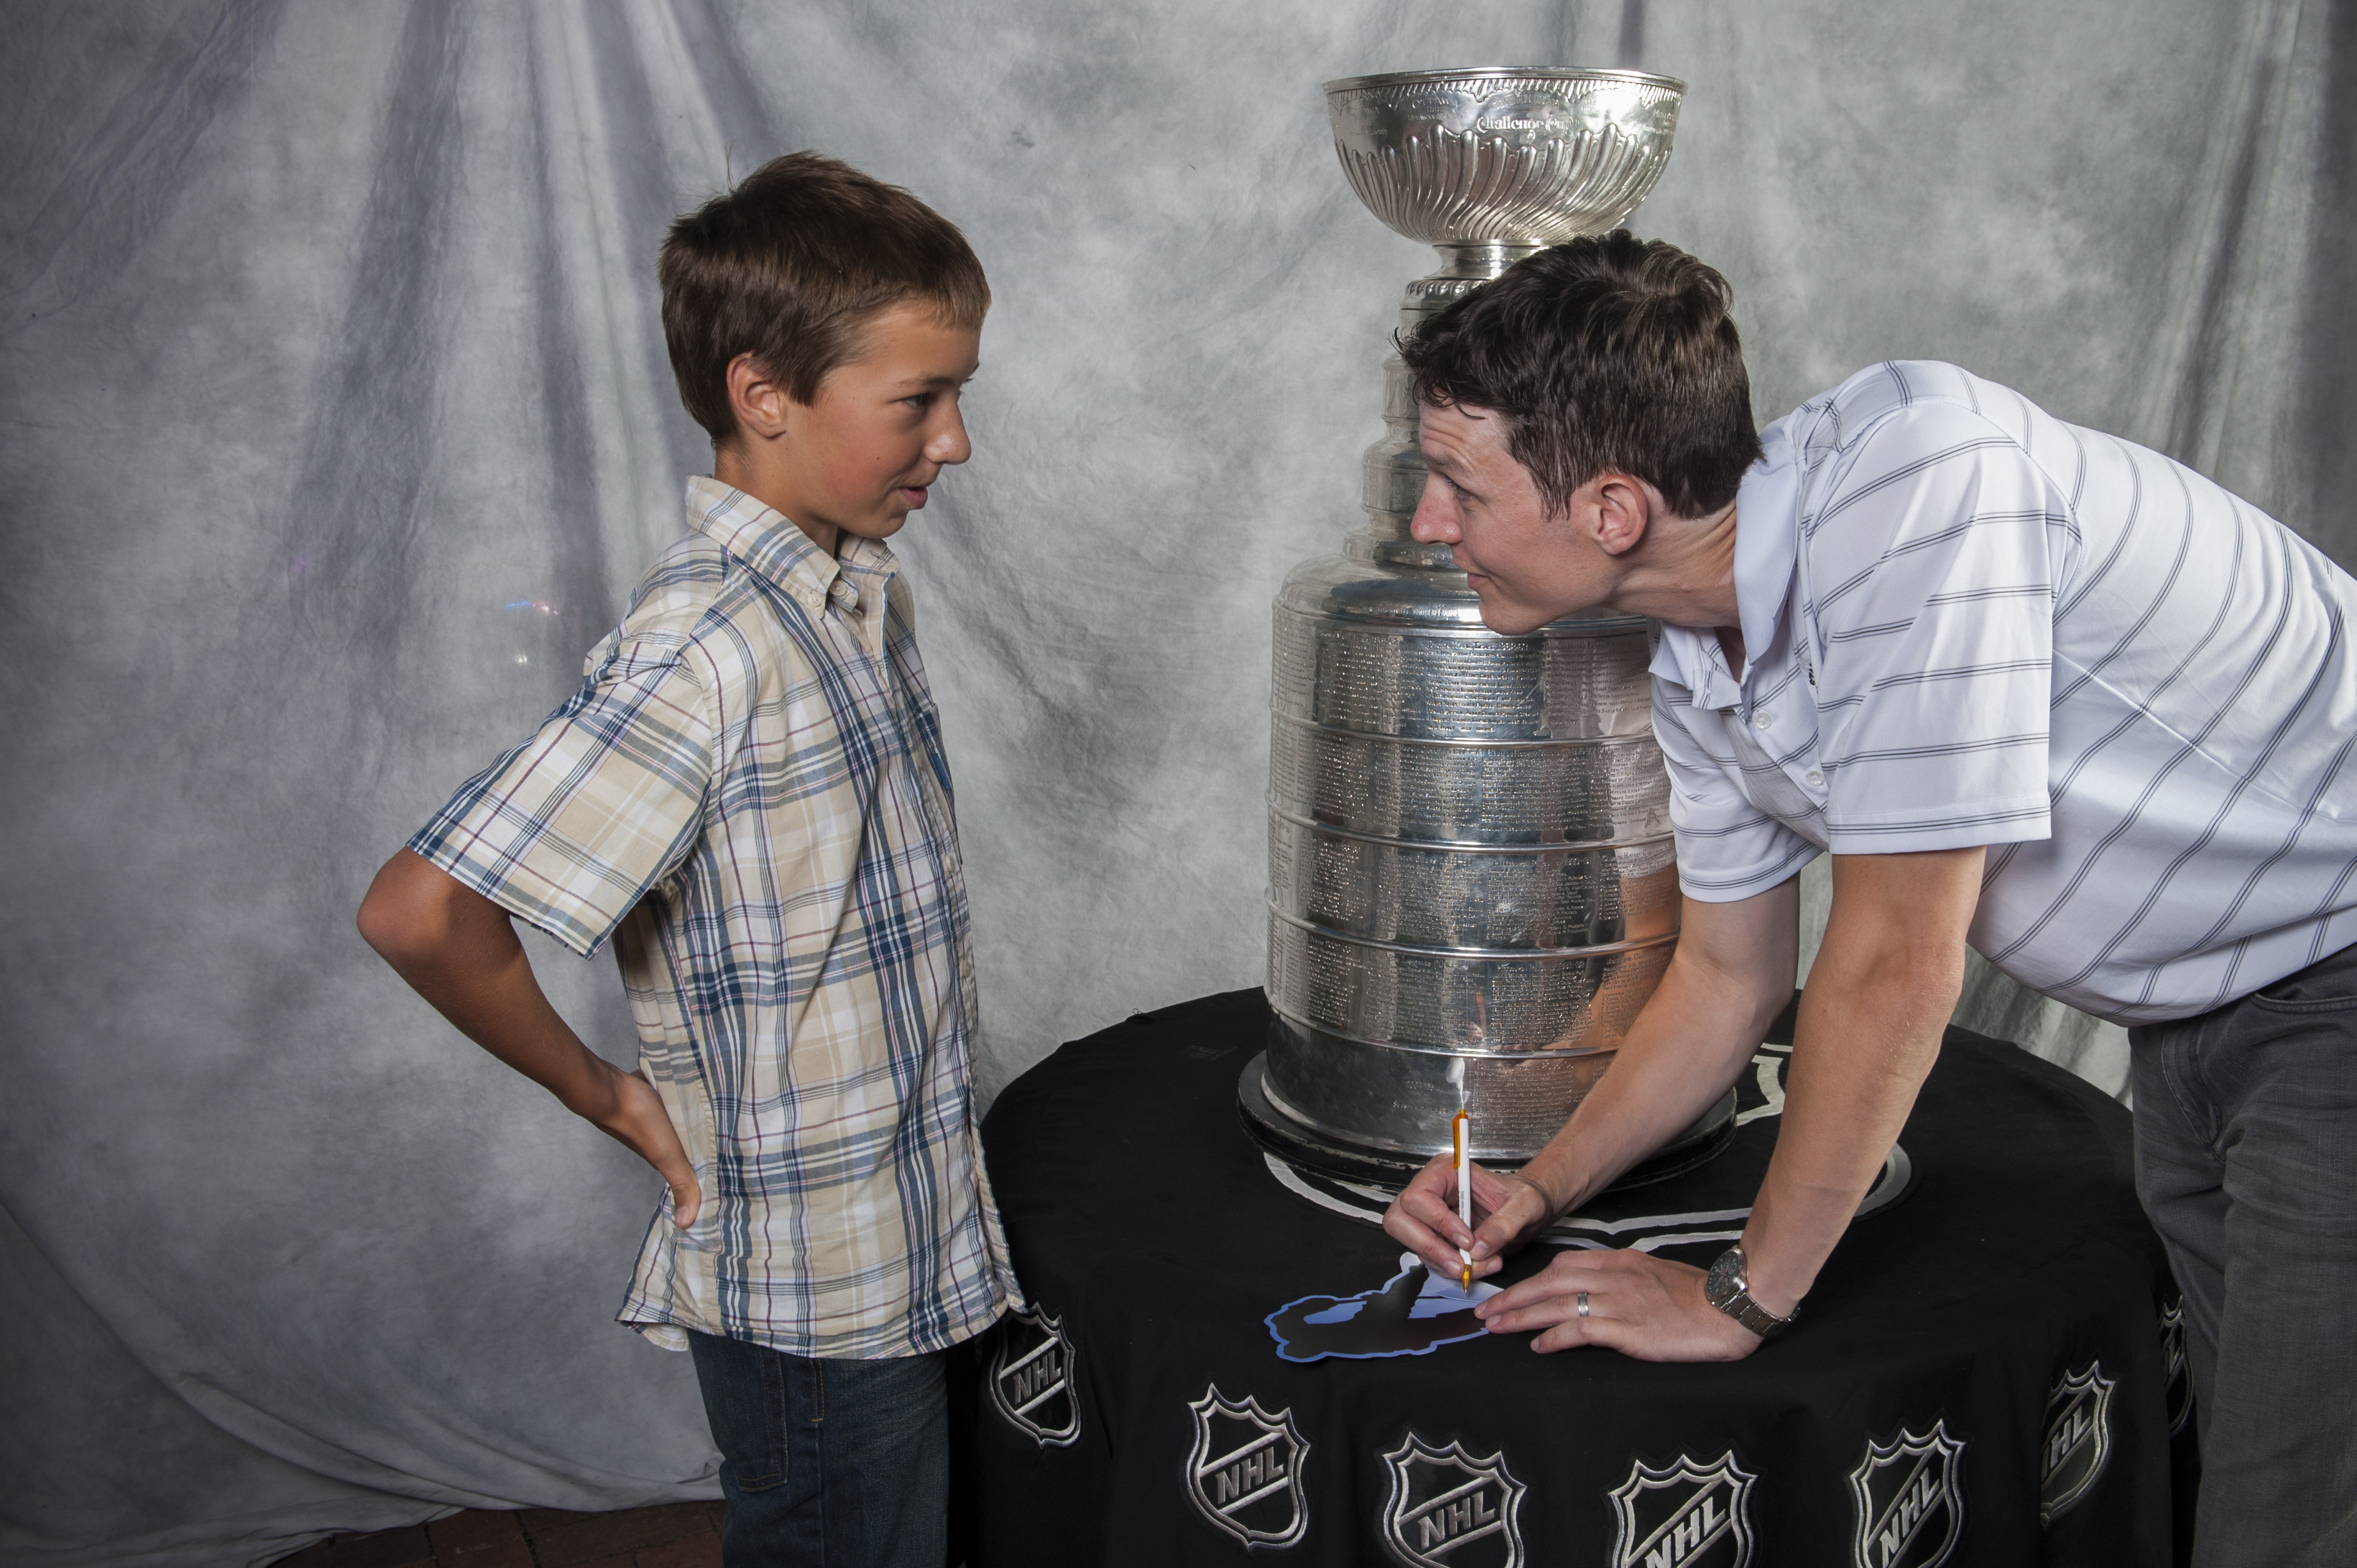 Greeting a fan during Zach's Stanley Cup Party